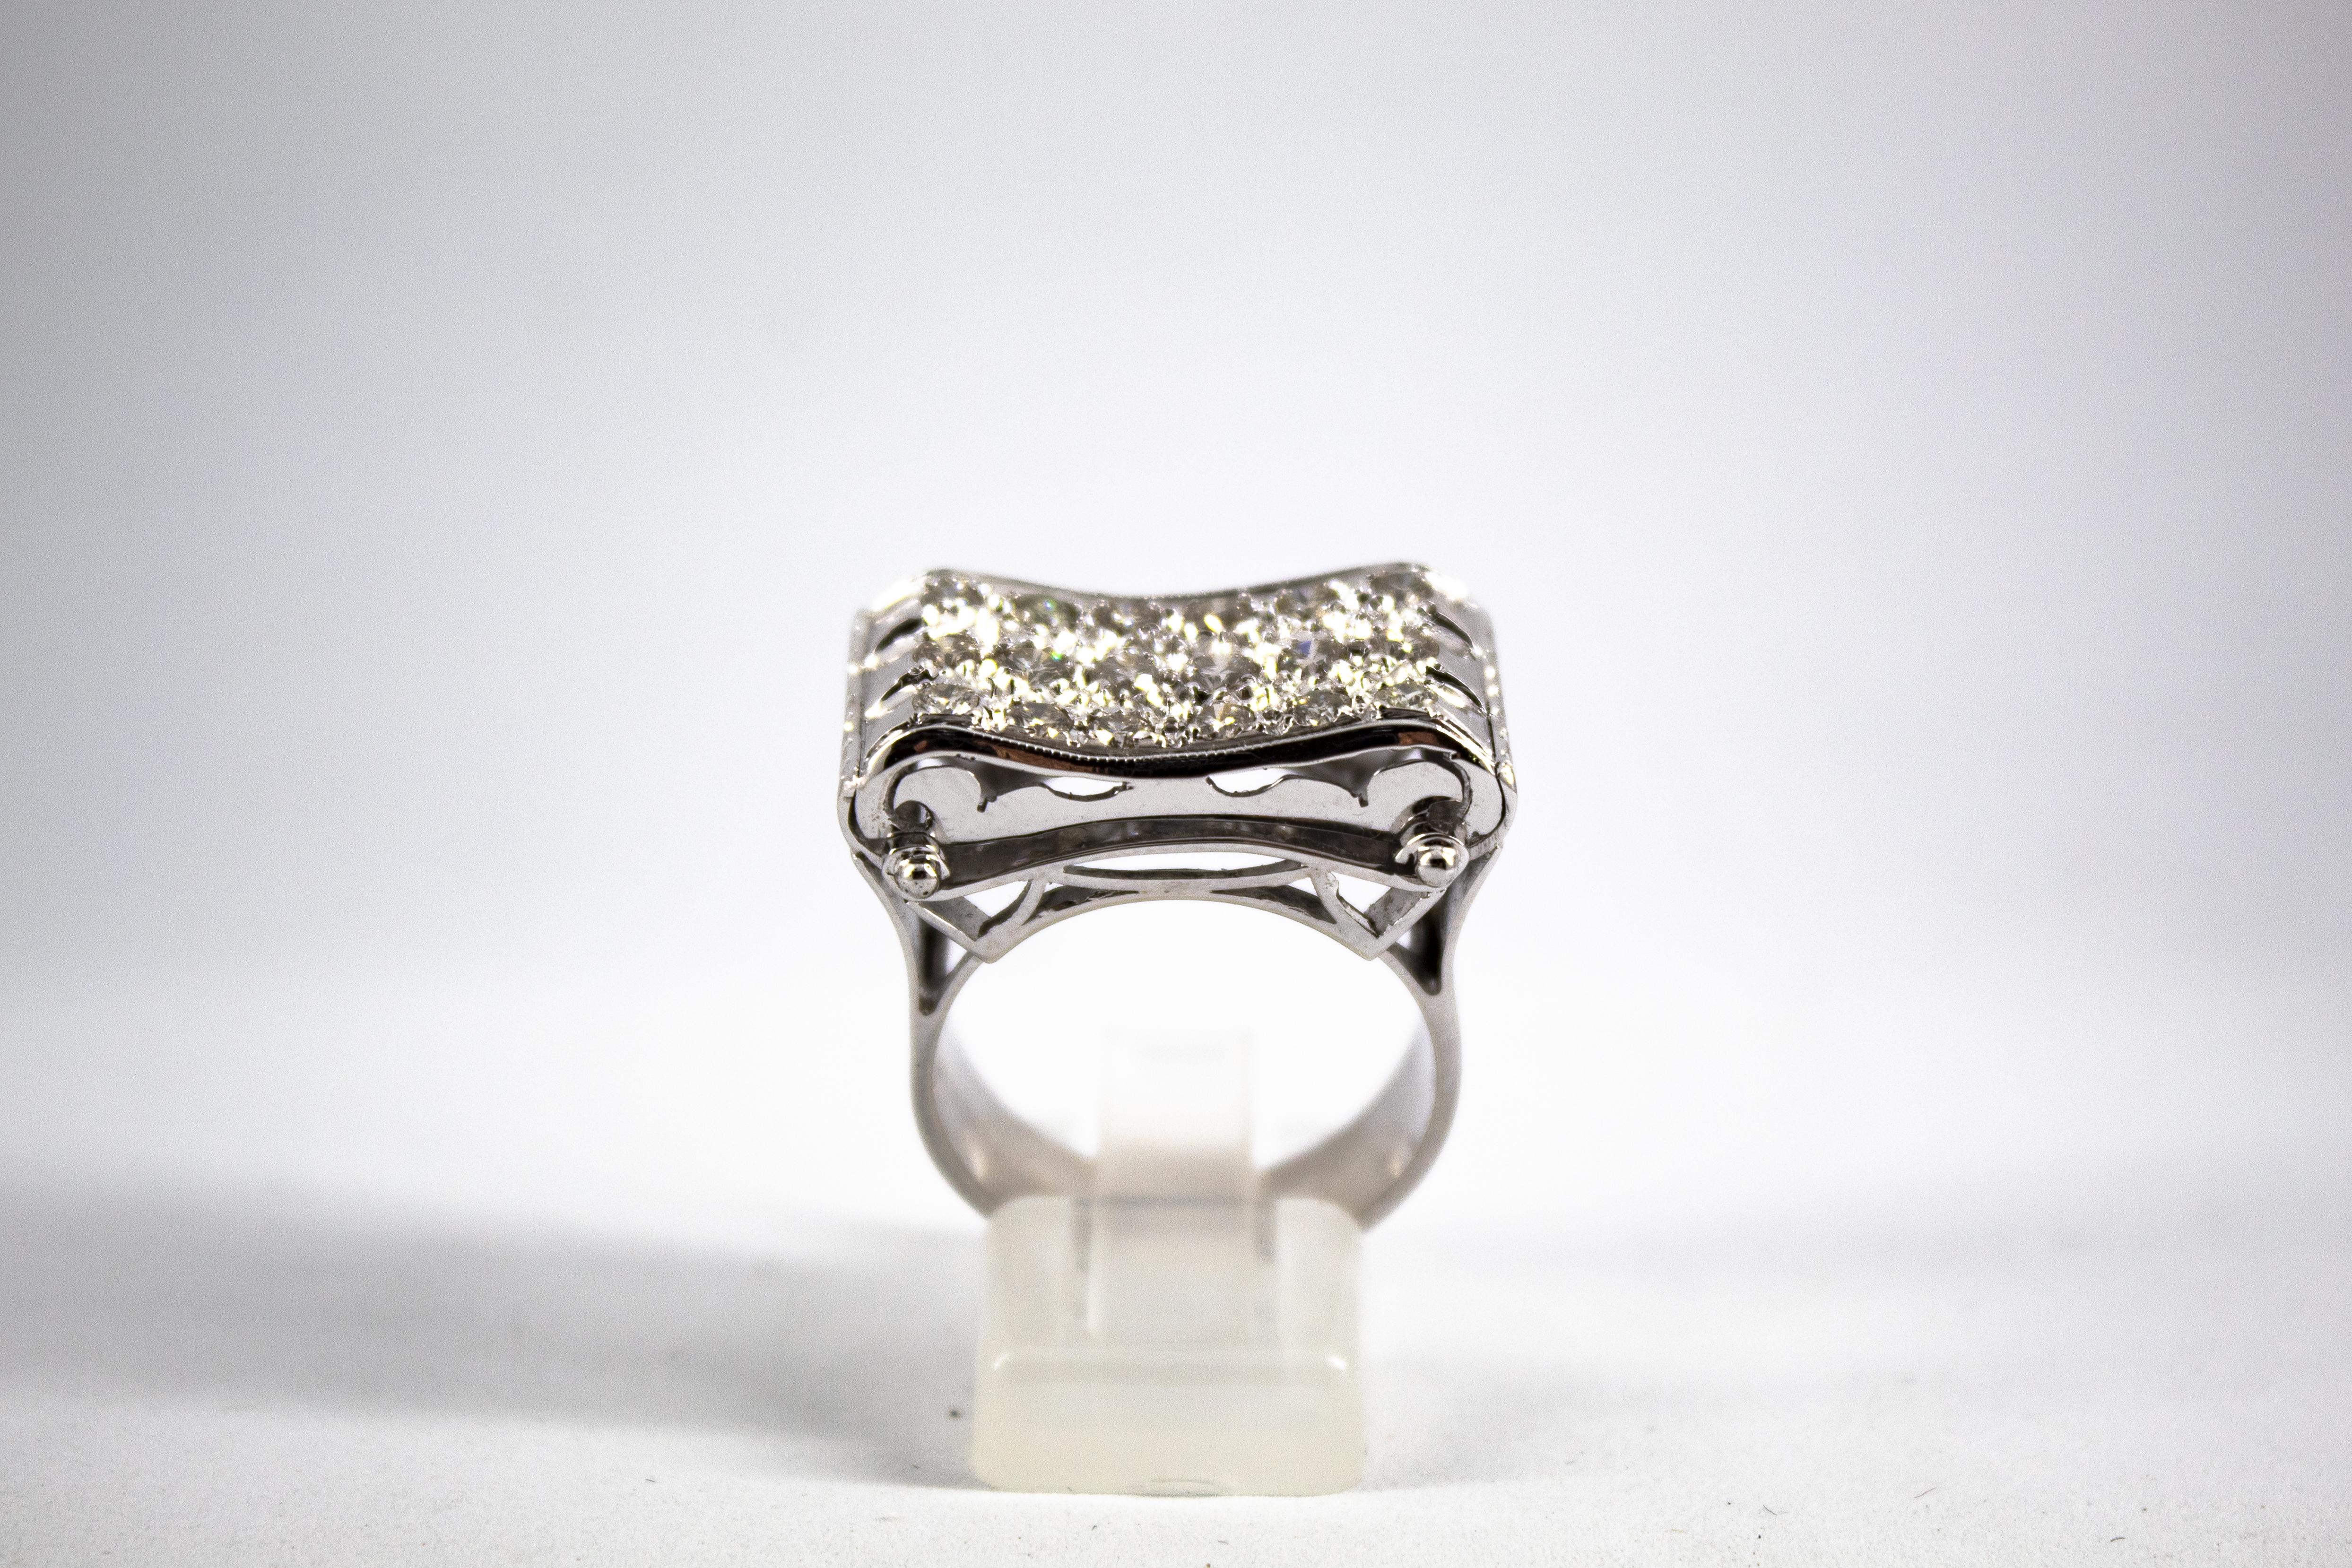 This Ring is made of 18K White Gold.
This Ring has 1.20 Carat of White Diamond.
Size ITA: 19 USA: 8 3/4
We're a workshop so every piece is handmade, customizable and resizable.